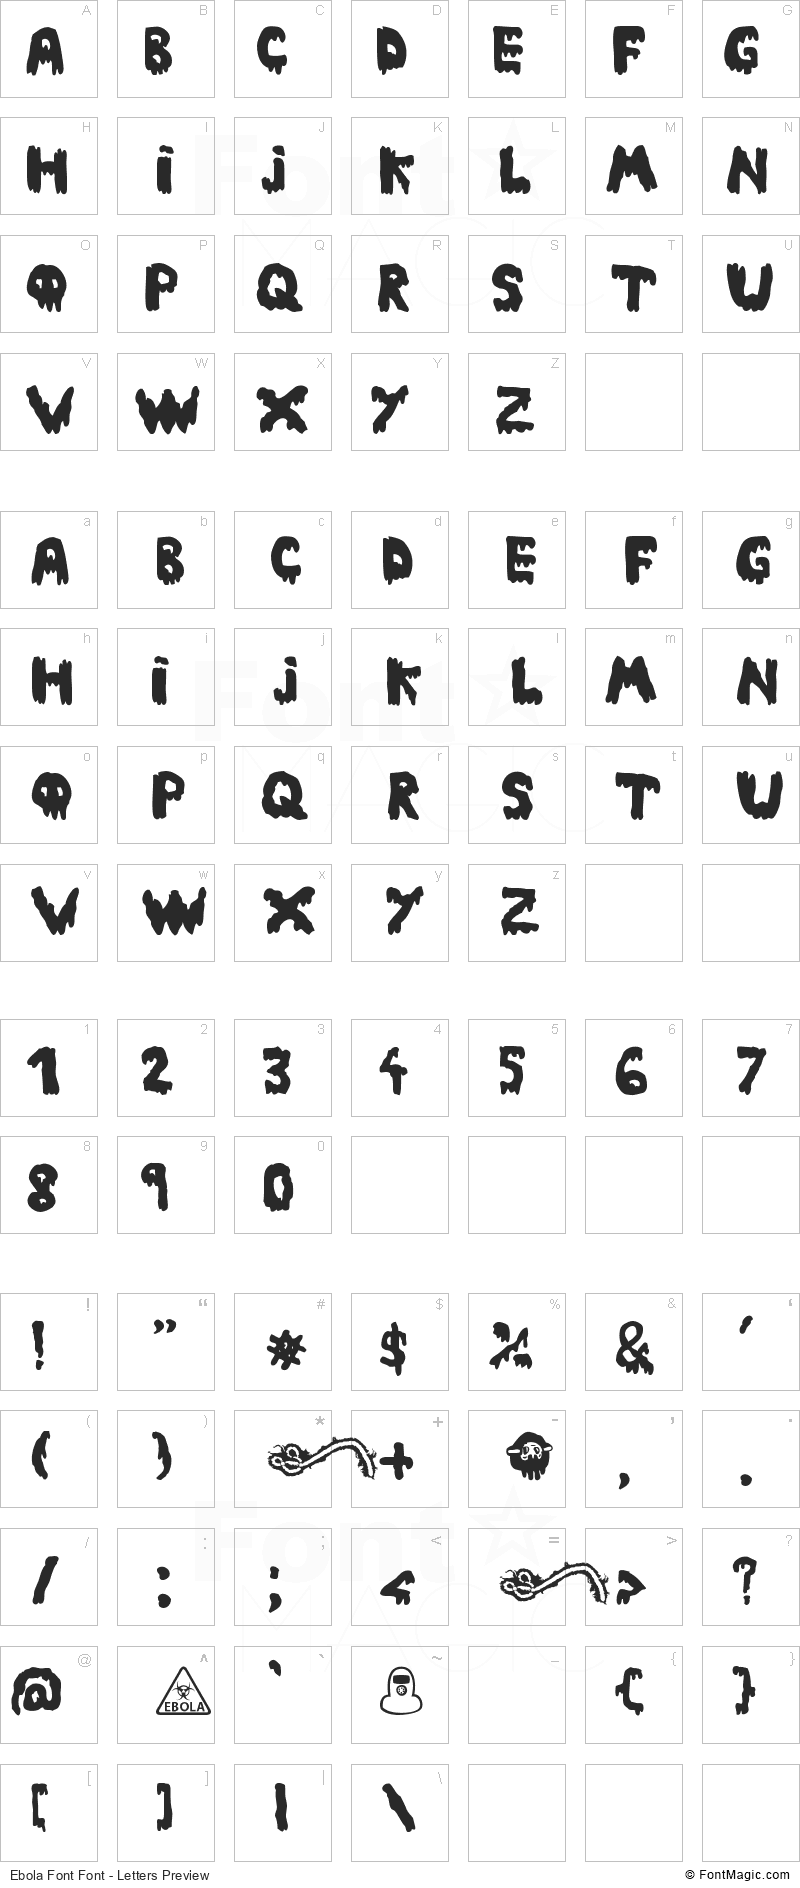 Ebola Font Font - All Latters Preview Chart